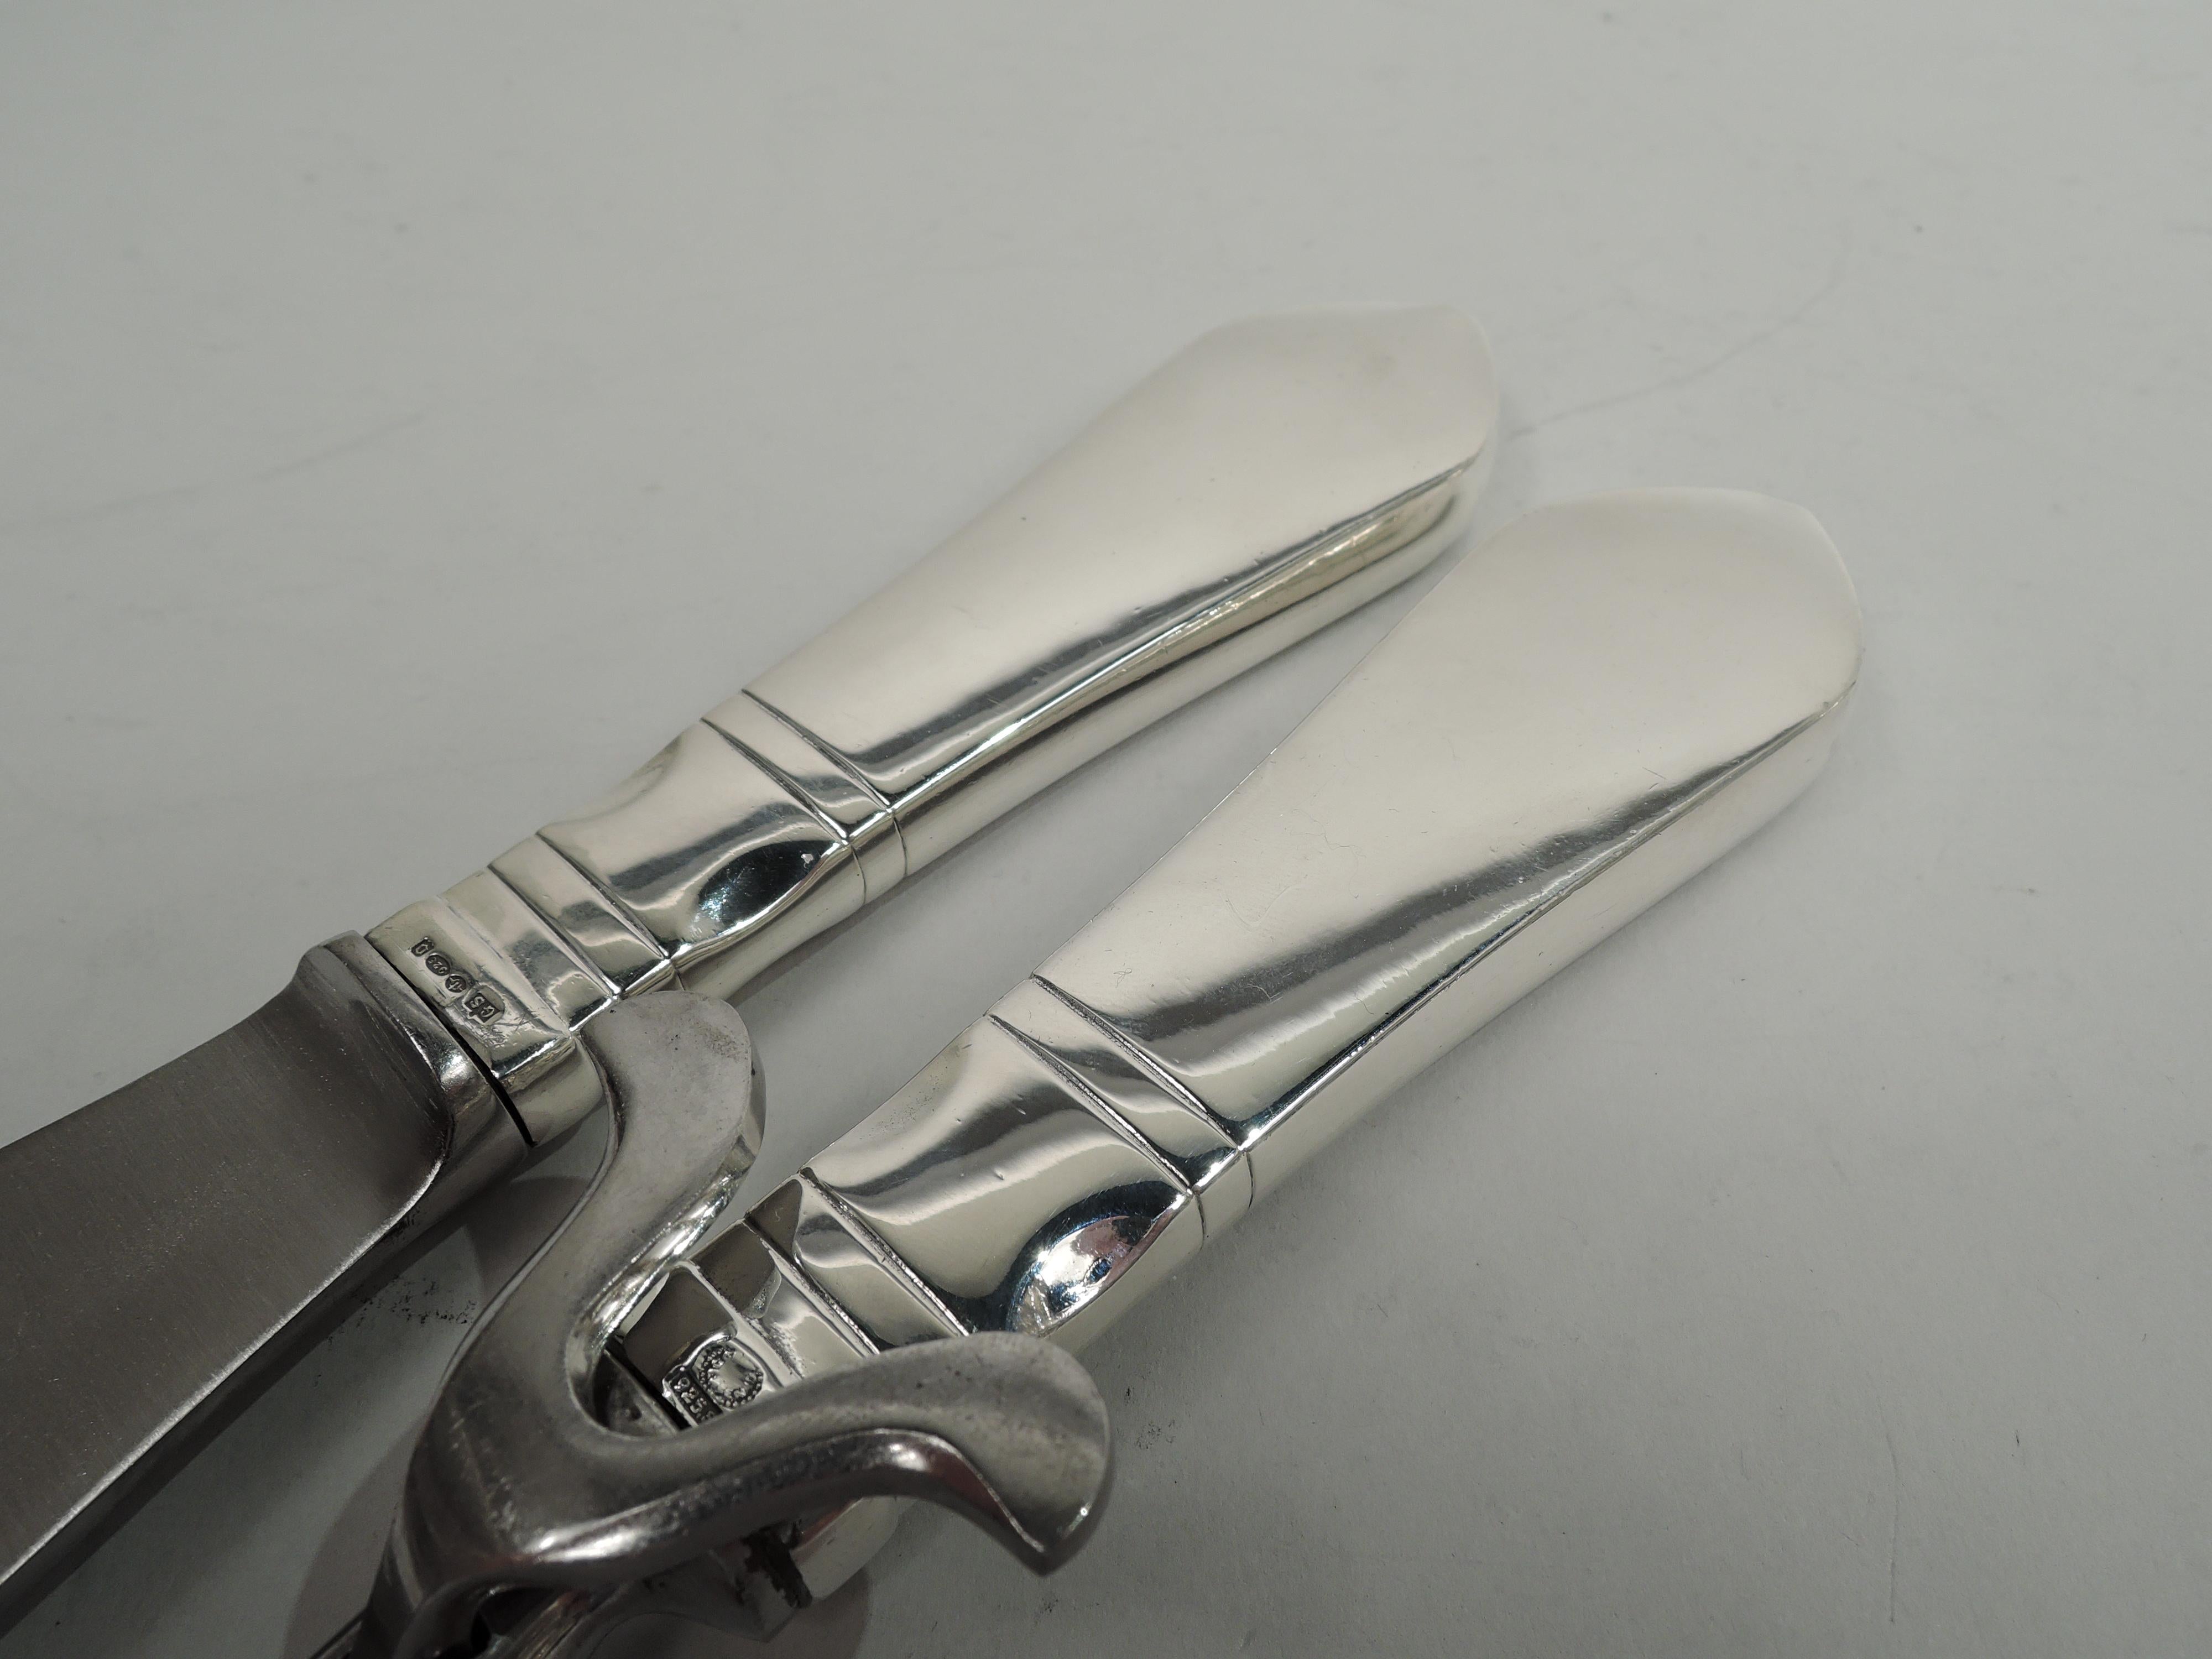 Continental sterling silver carving pair. Made by Georg Jensen in Copenhagen, and imported in 1929 to England by George Stockwell. Upward tapering handle with tooled bands; convex terminal with engraved armorial. Stainless steel blade (knife) and